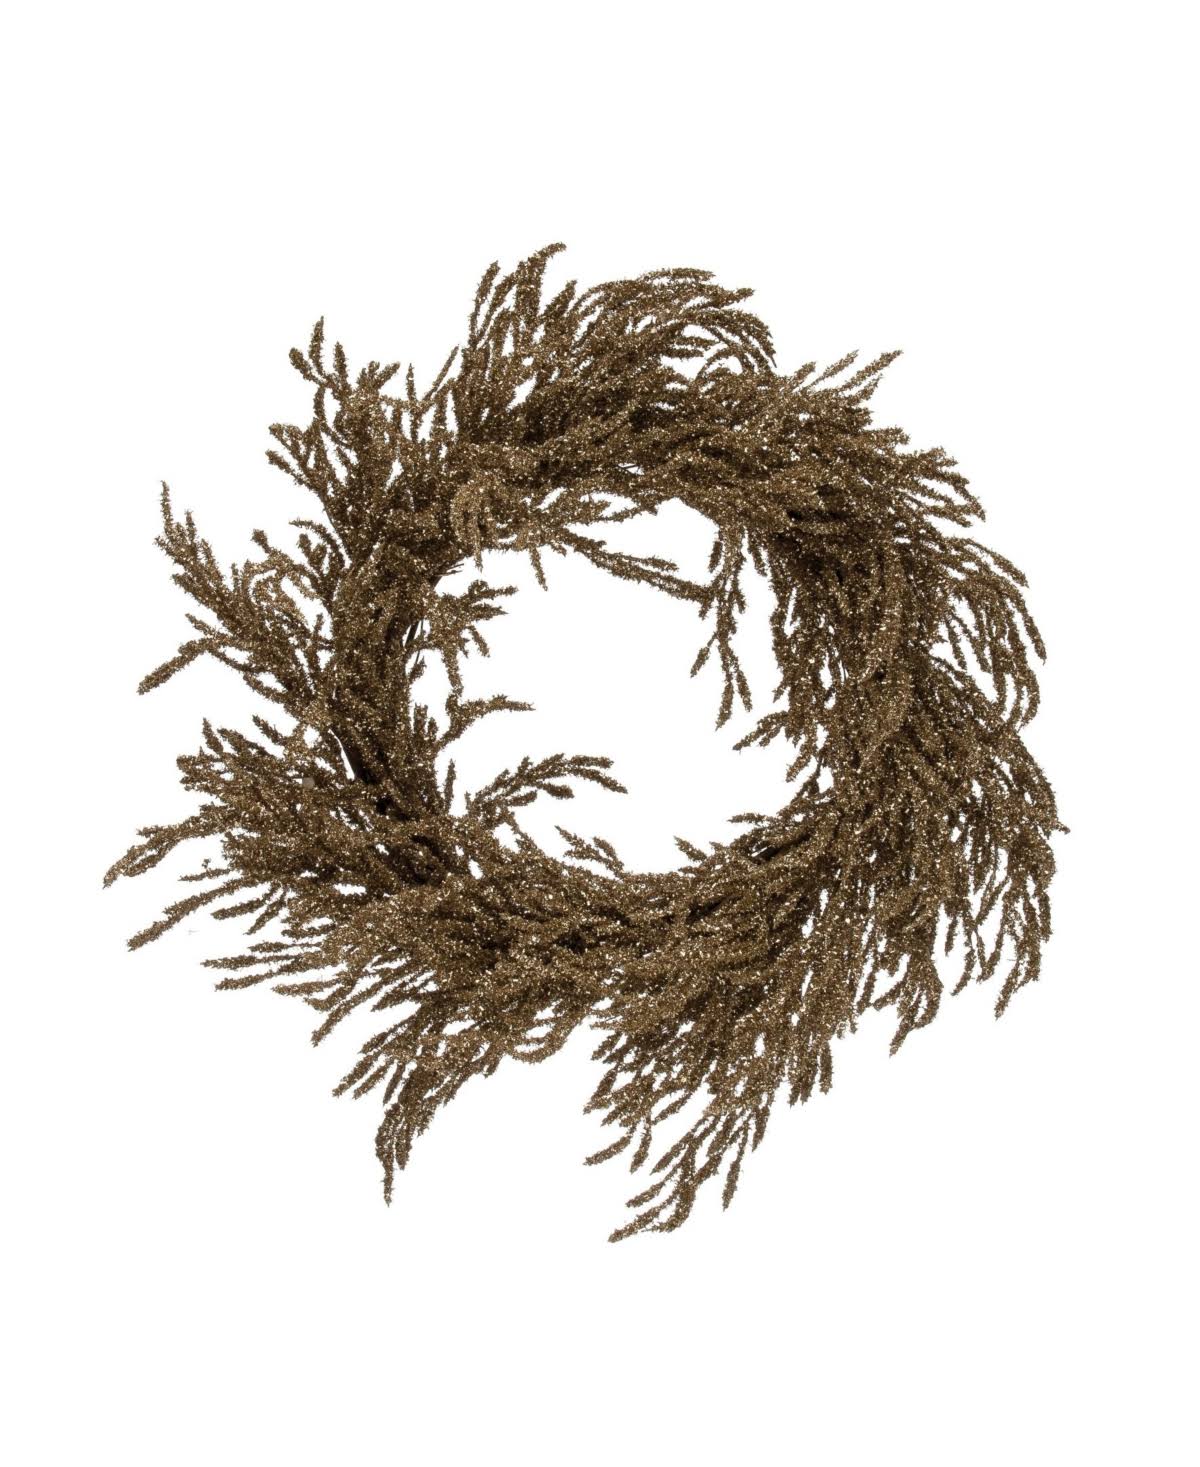 Creative Co-op Inc 20" Faux Pine Wreath with Glitter - Natural